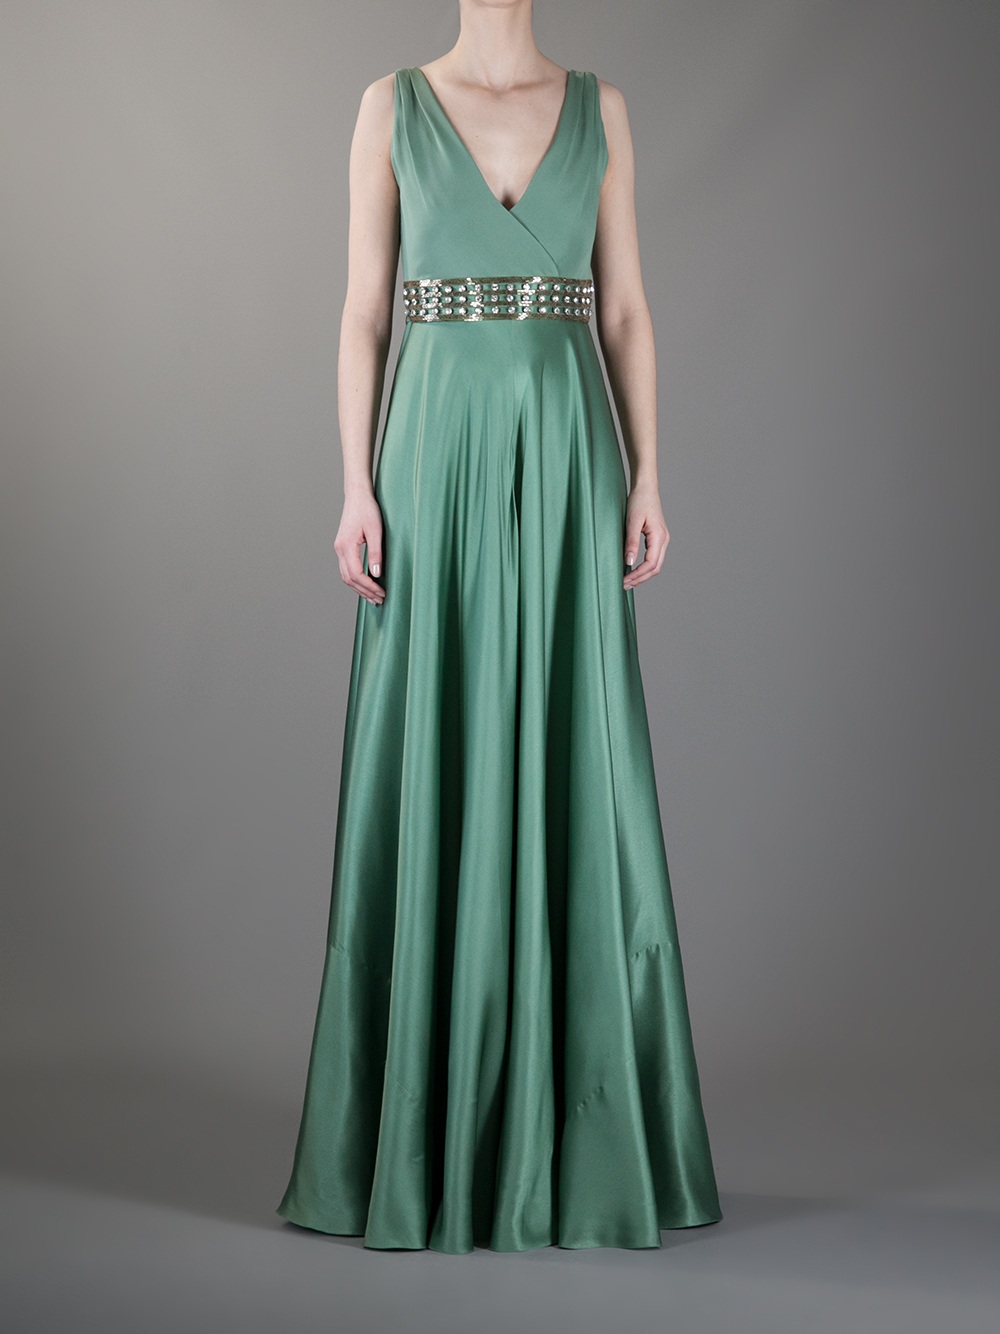 Samui where to buy evening dresses in london tokyo